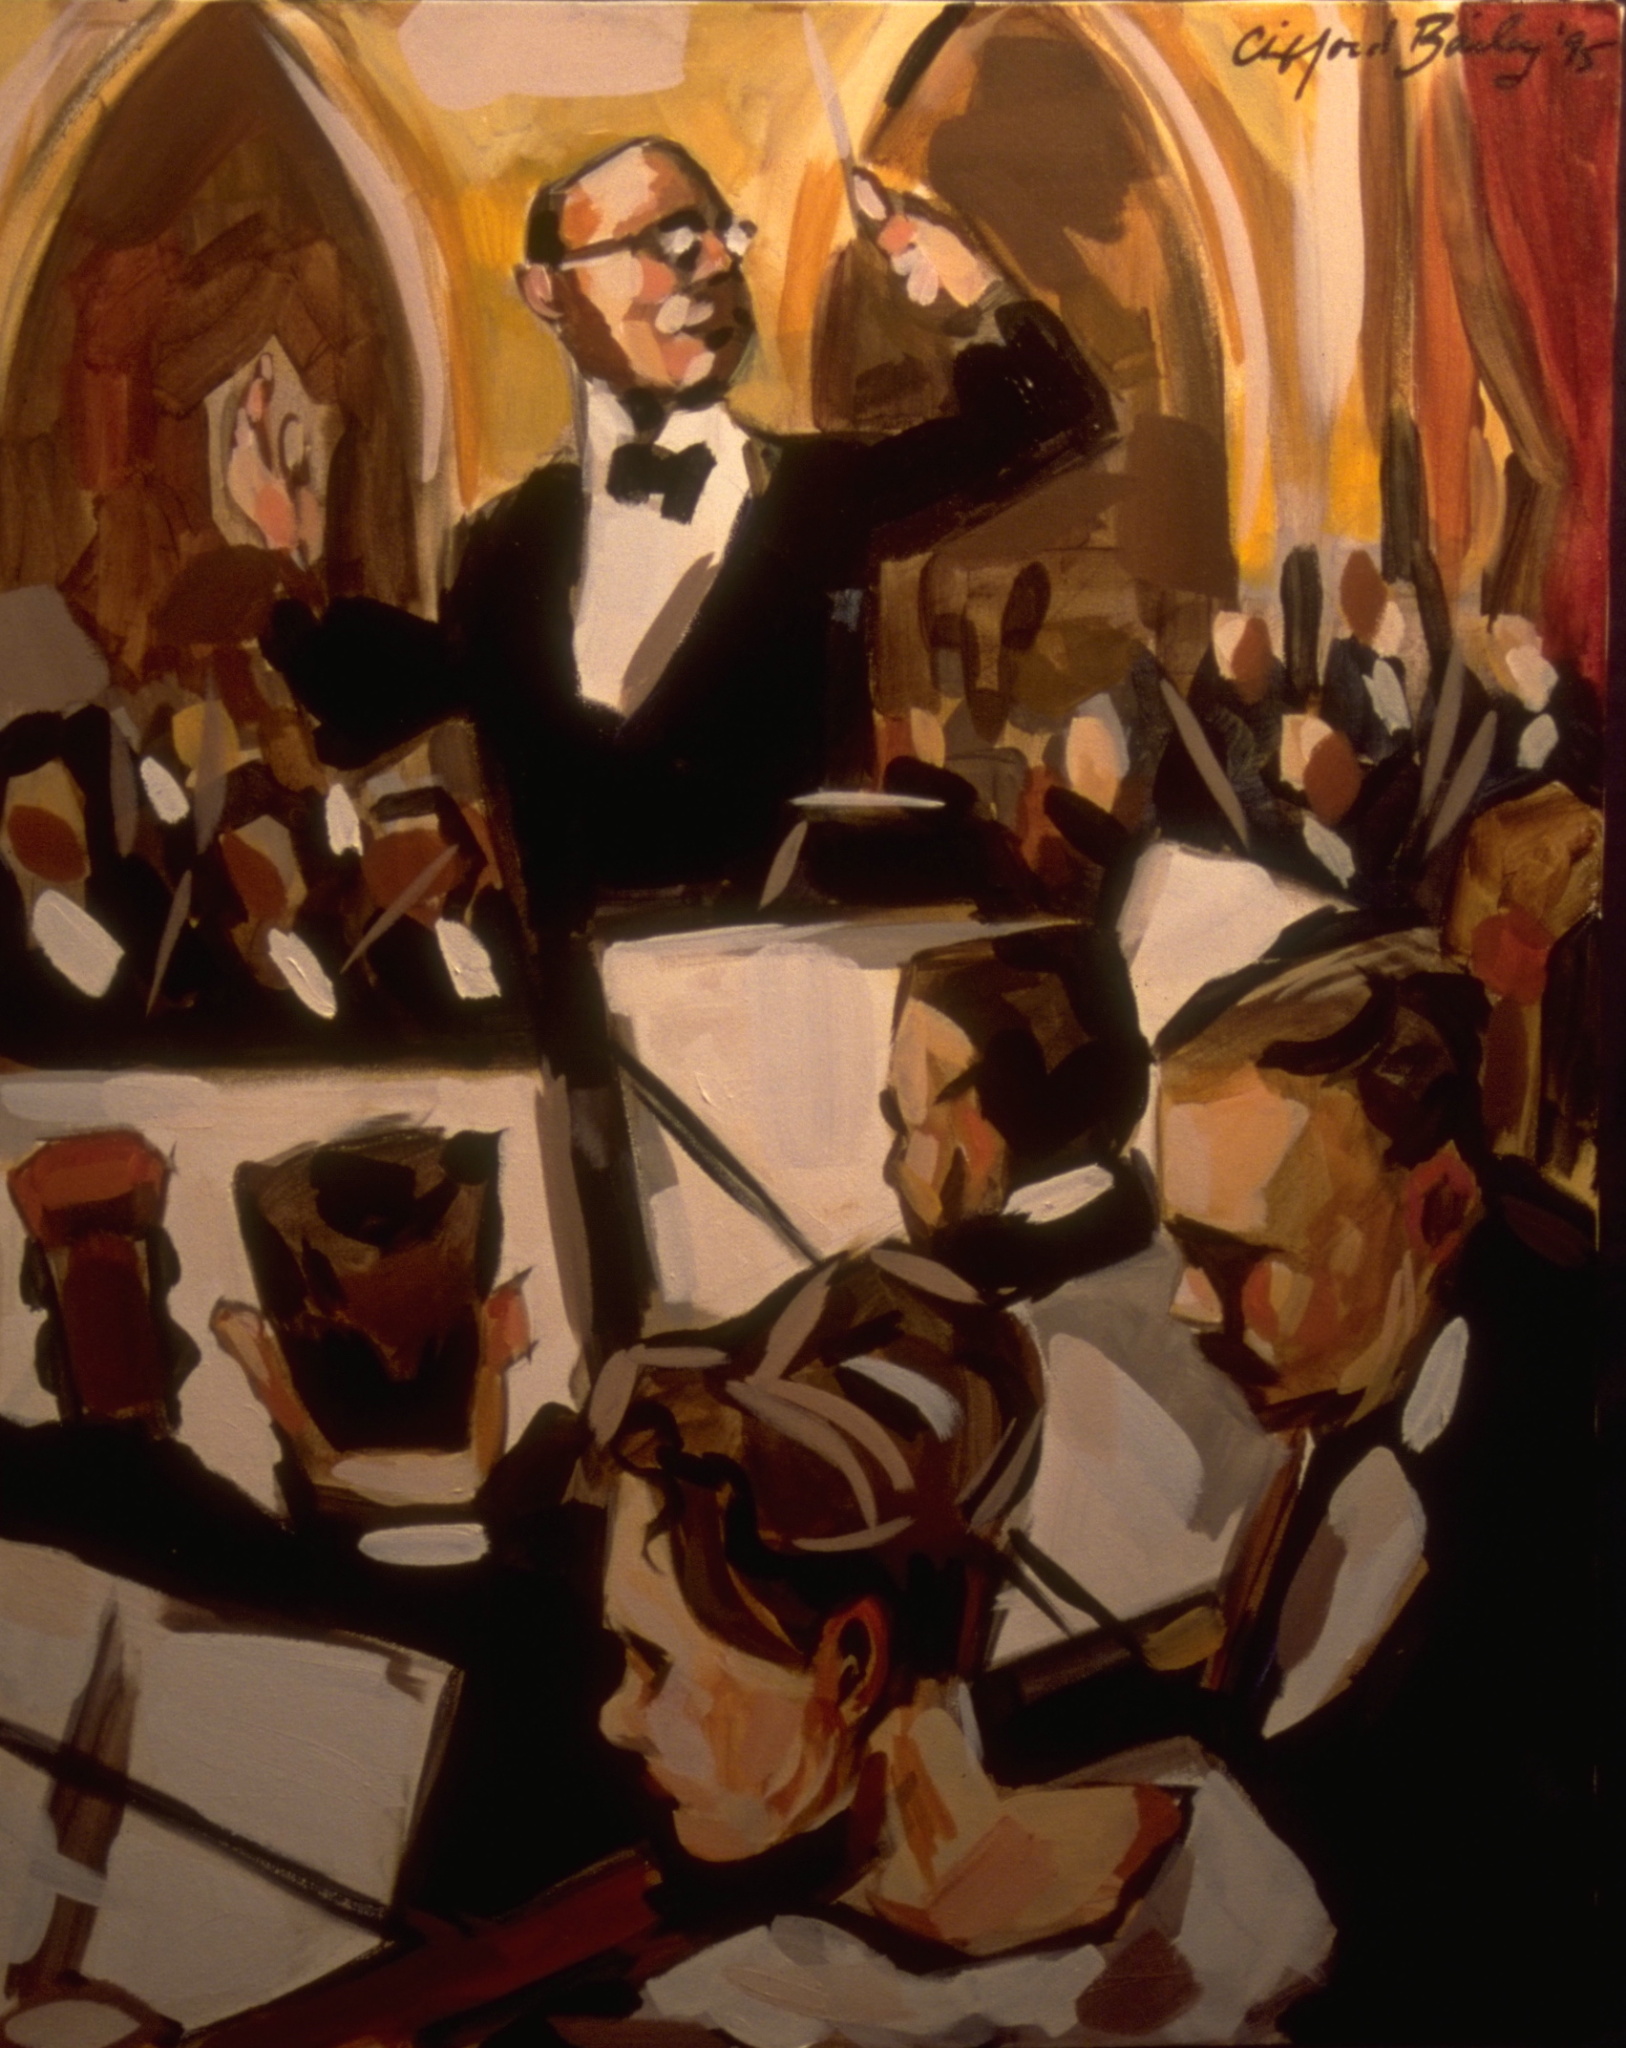 "Conductor" by Clifford Bailey Fine Art